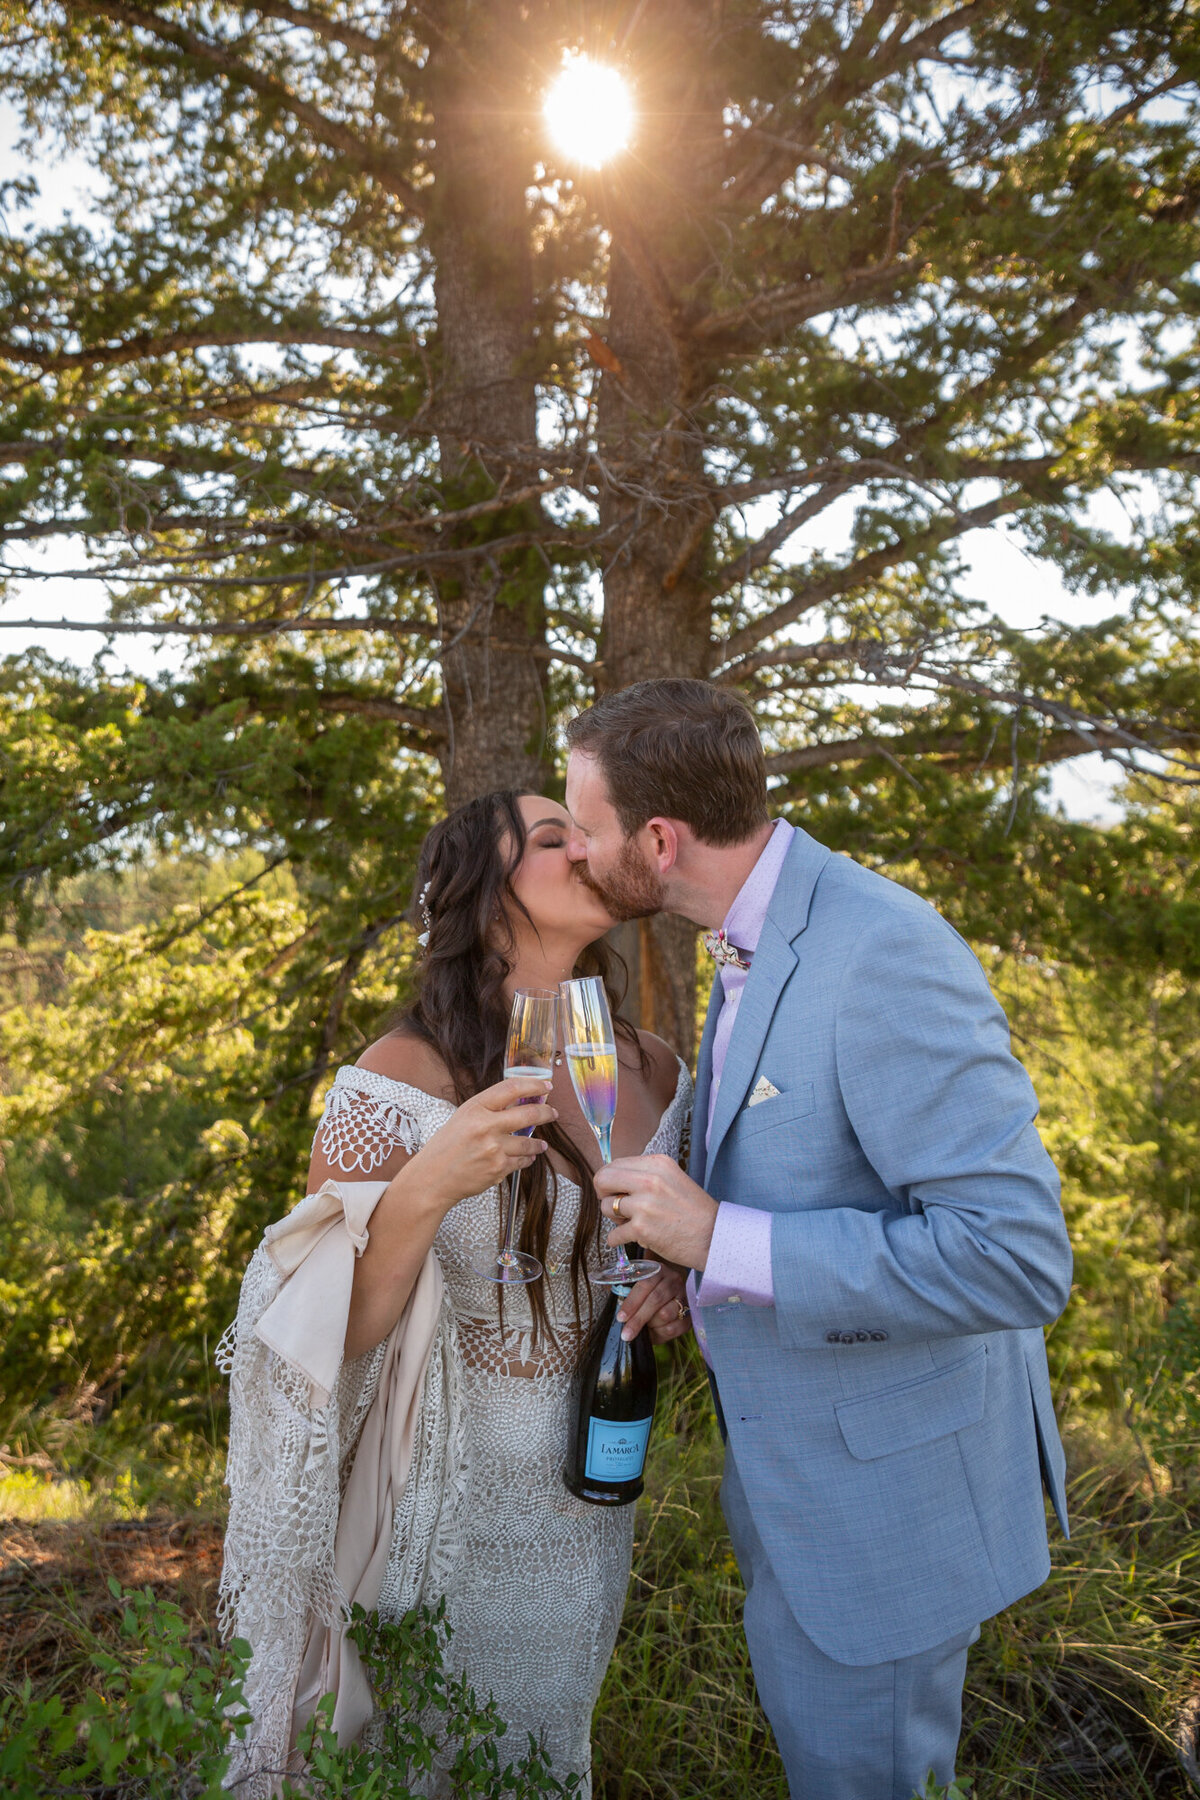 A couple holding a champagne bottle kiss as the sun flares through the trees behind them.